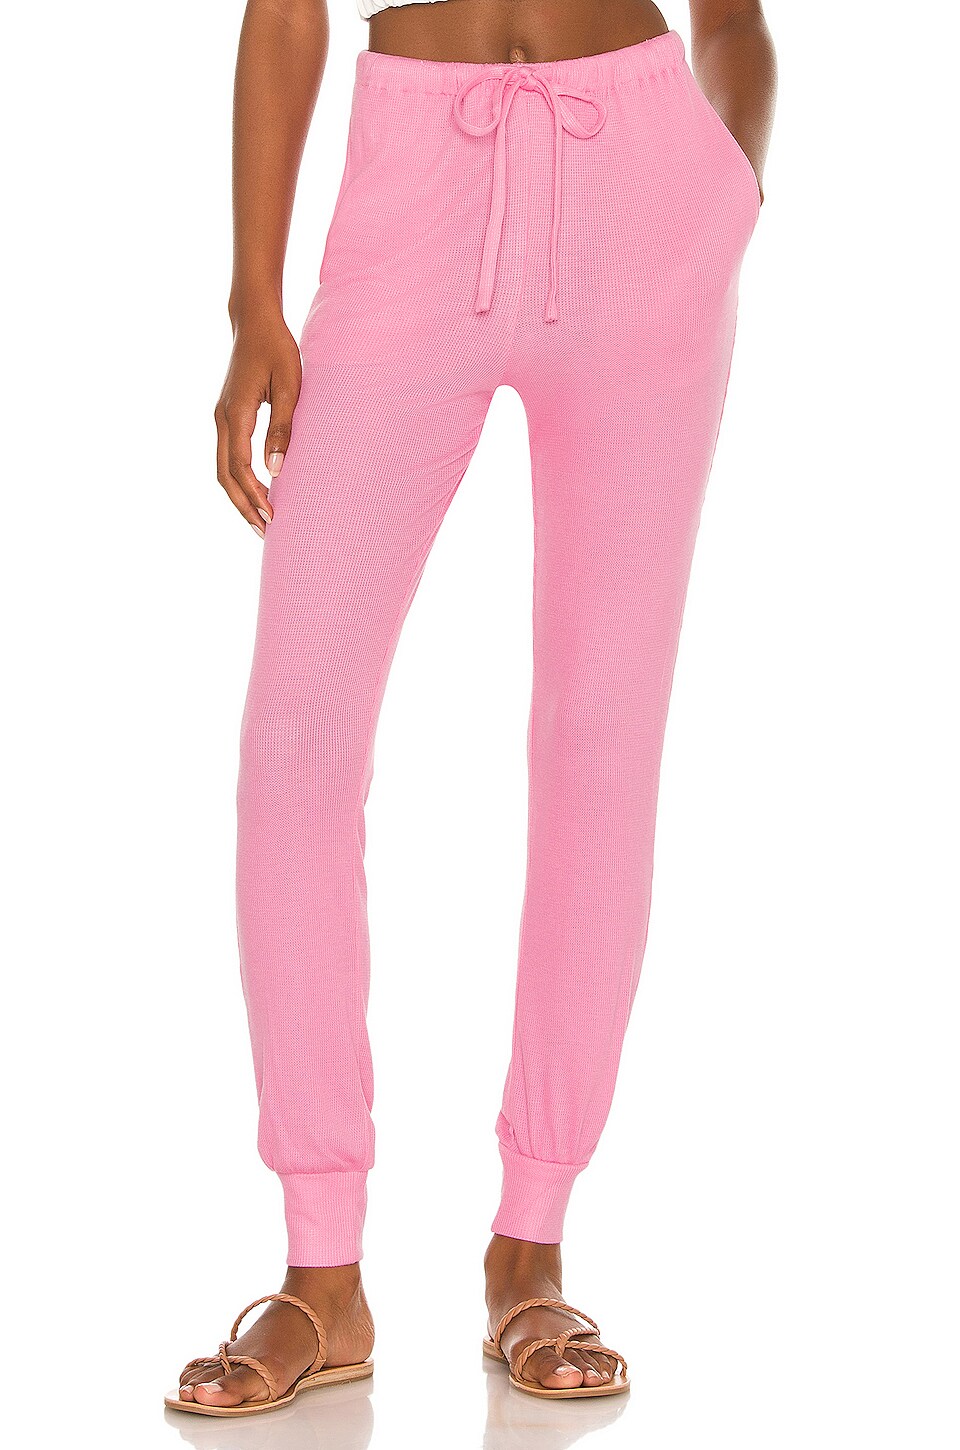 Lovers and Friends Kylie Lounge Legging Bubblegum Pink